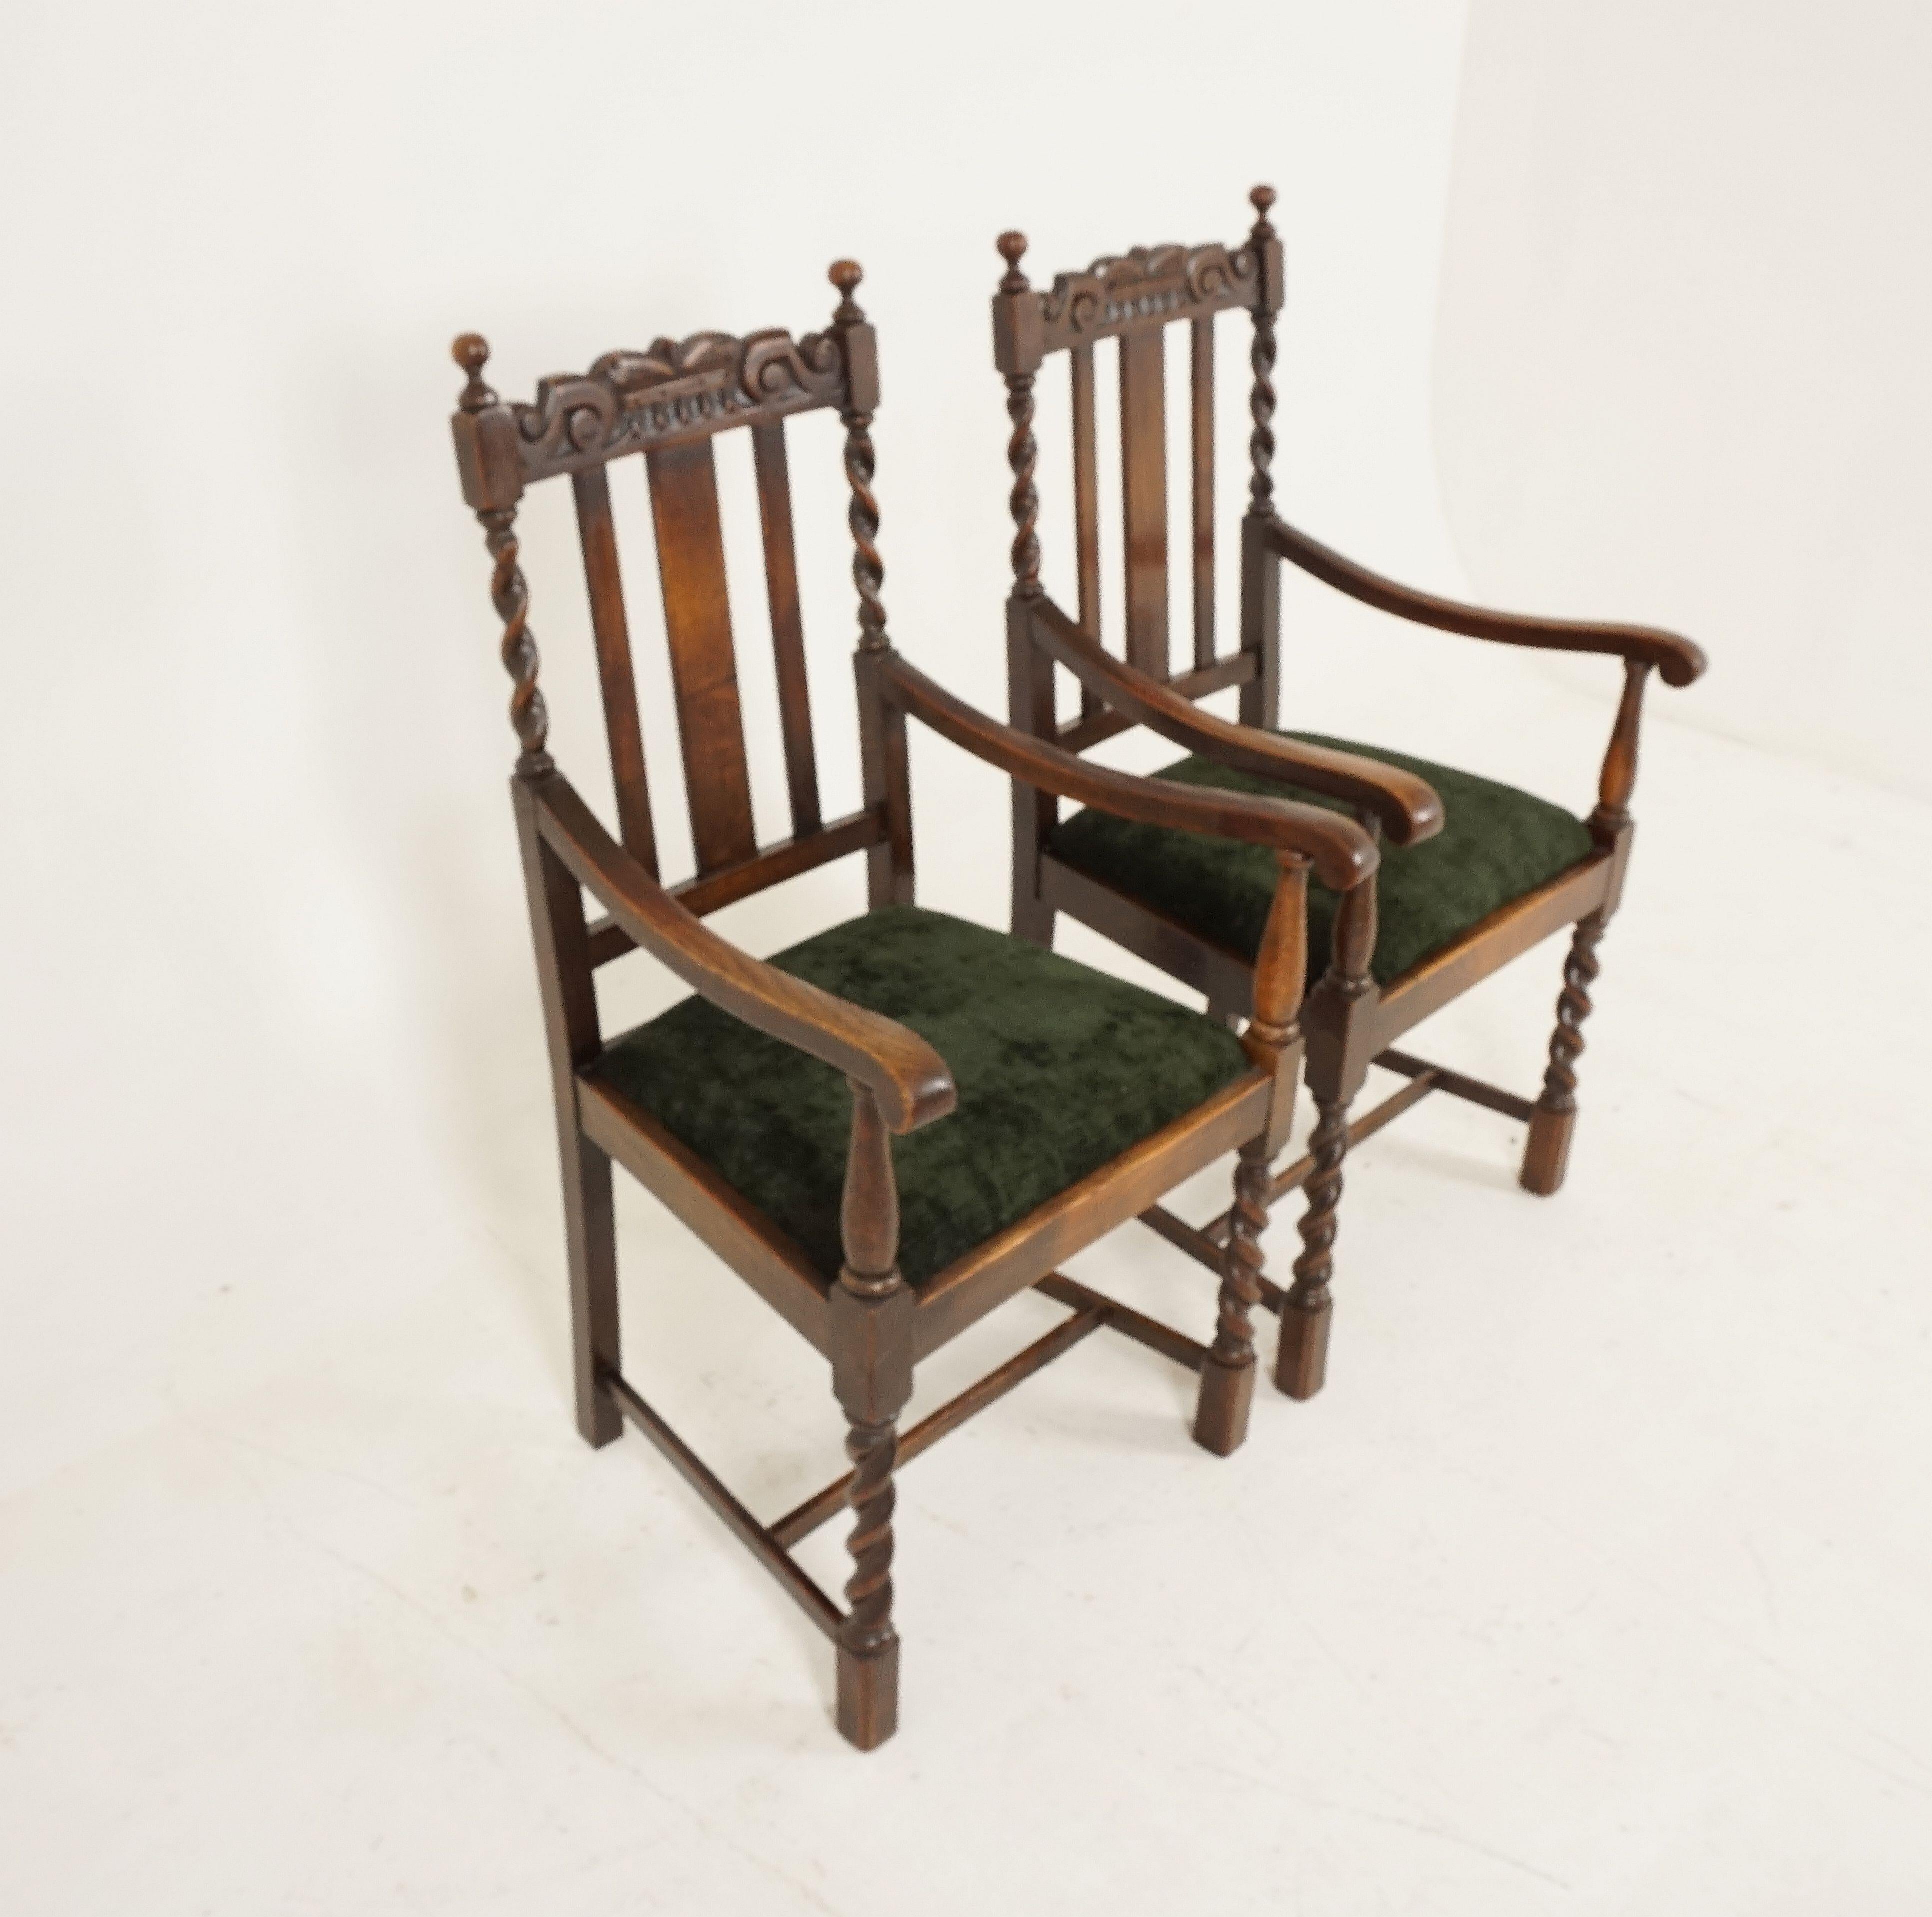 Antique pair of arm chairs, carved oak, barley twist, Scotland 1920, B2485

Scotland 1920
Solid oak
Original finish
Carved rail on top
Above two barley twist supports
Three vertical slats on the open back
Out swept arms
Lift out upholstered